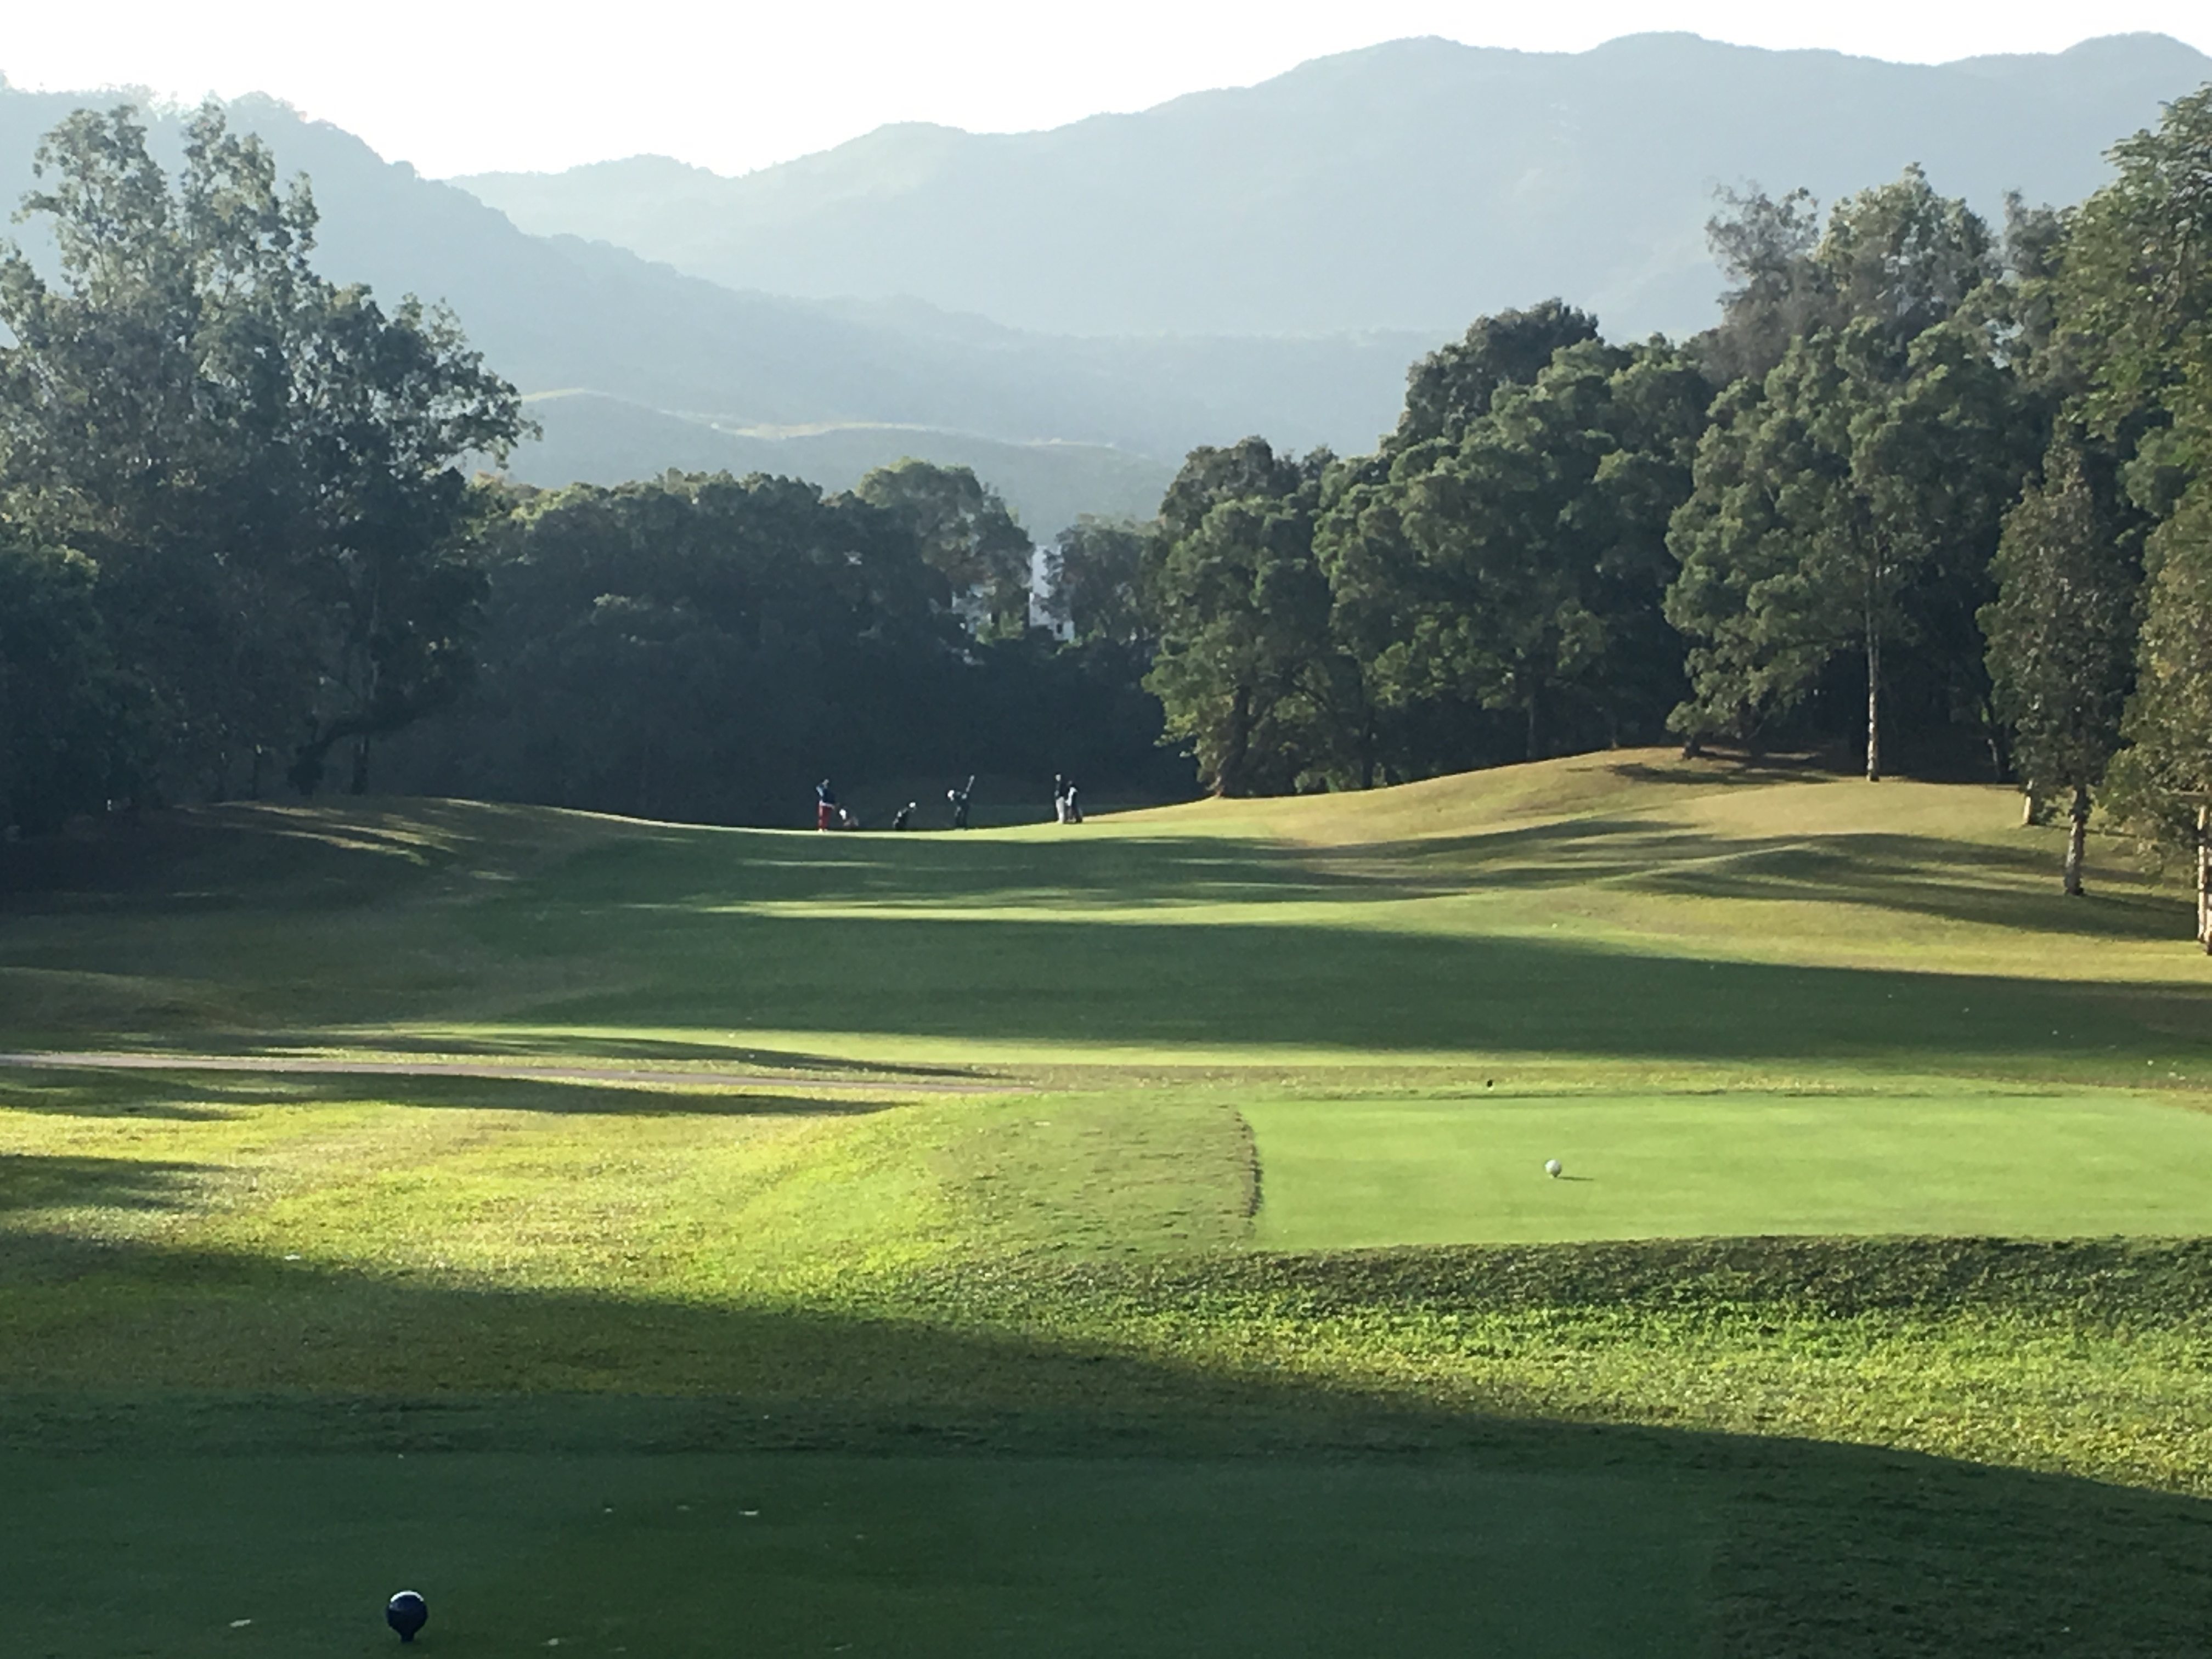 The Old Course at the Hong Kong Golf Club in Fanling in January 2018. Photo: Handout